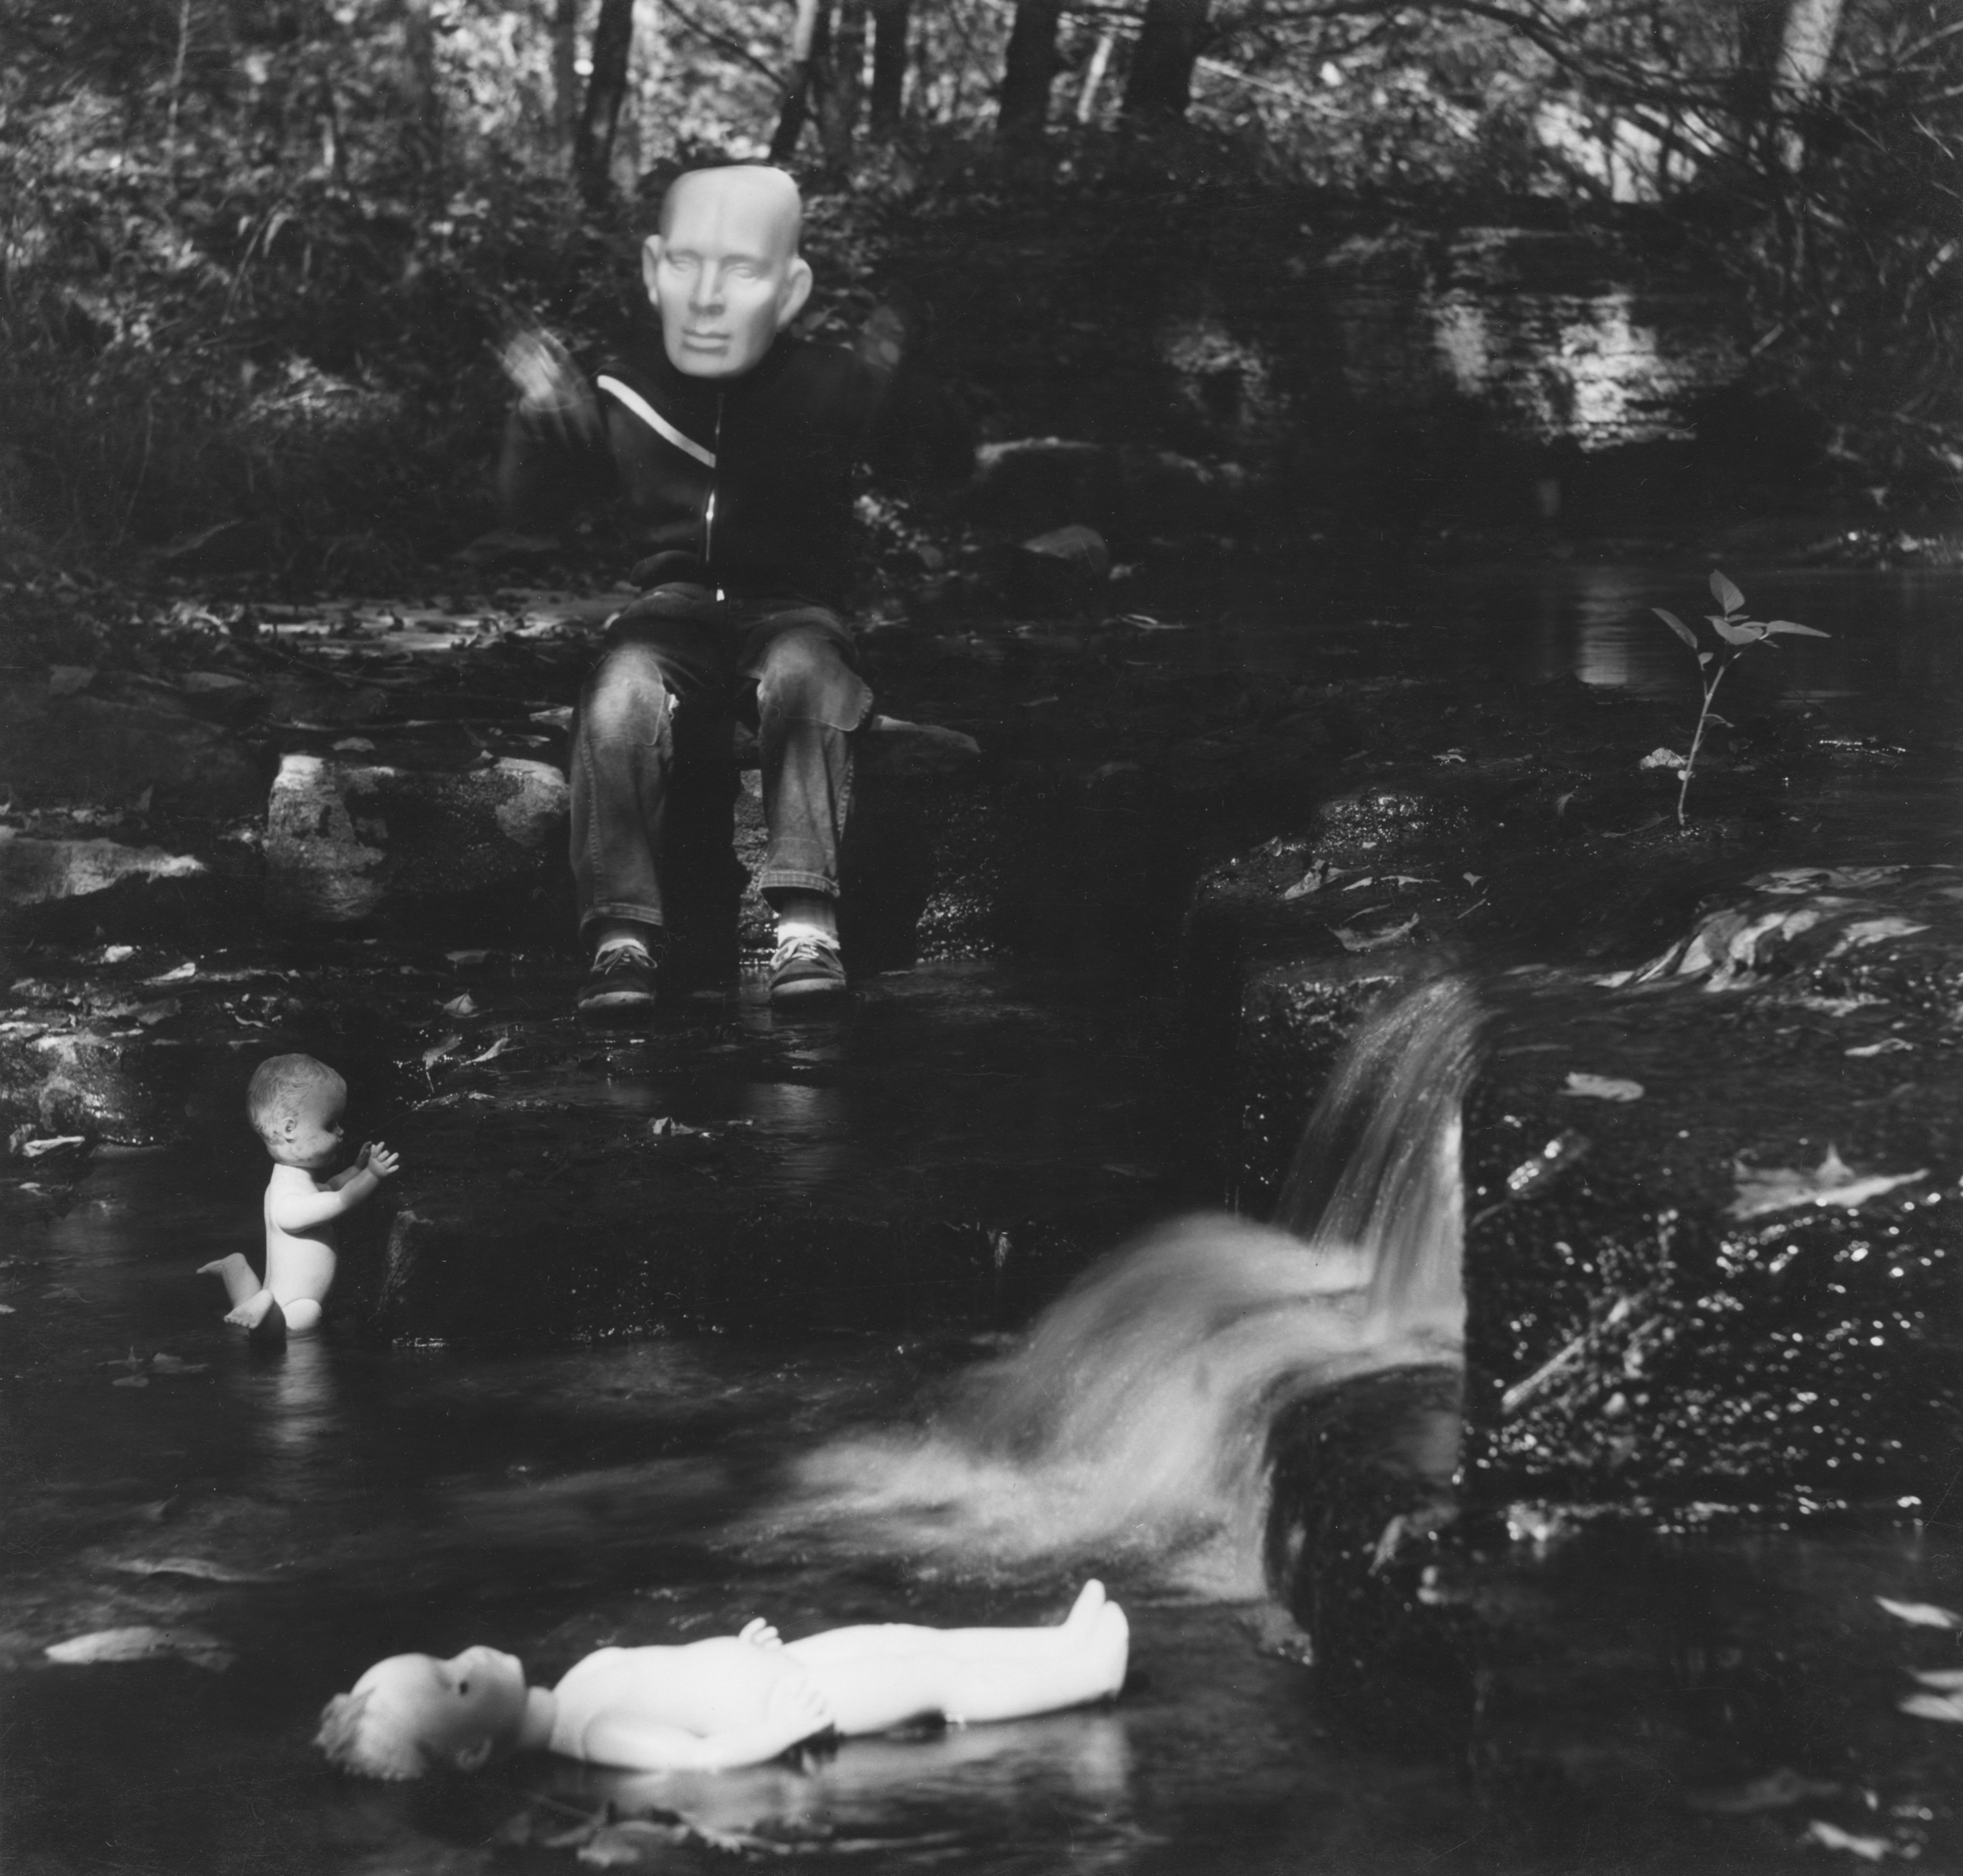 Black and white photograph of a child figure wearing a mask and sitting by a creek with dolls in the water